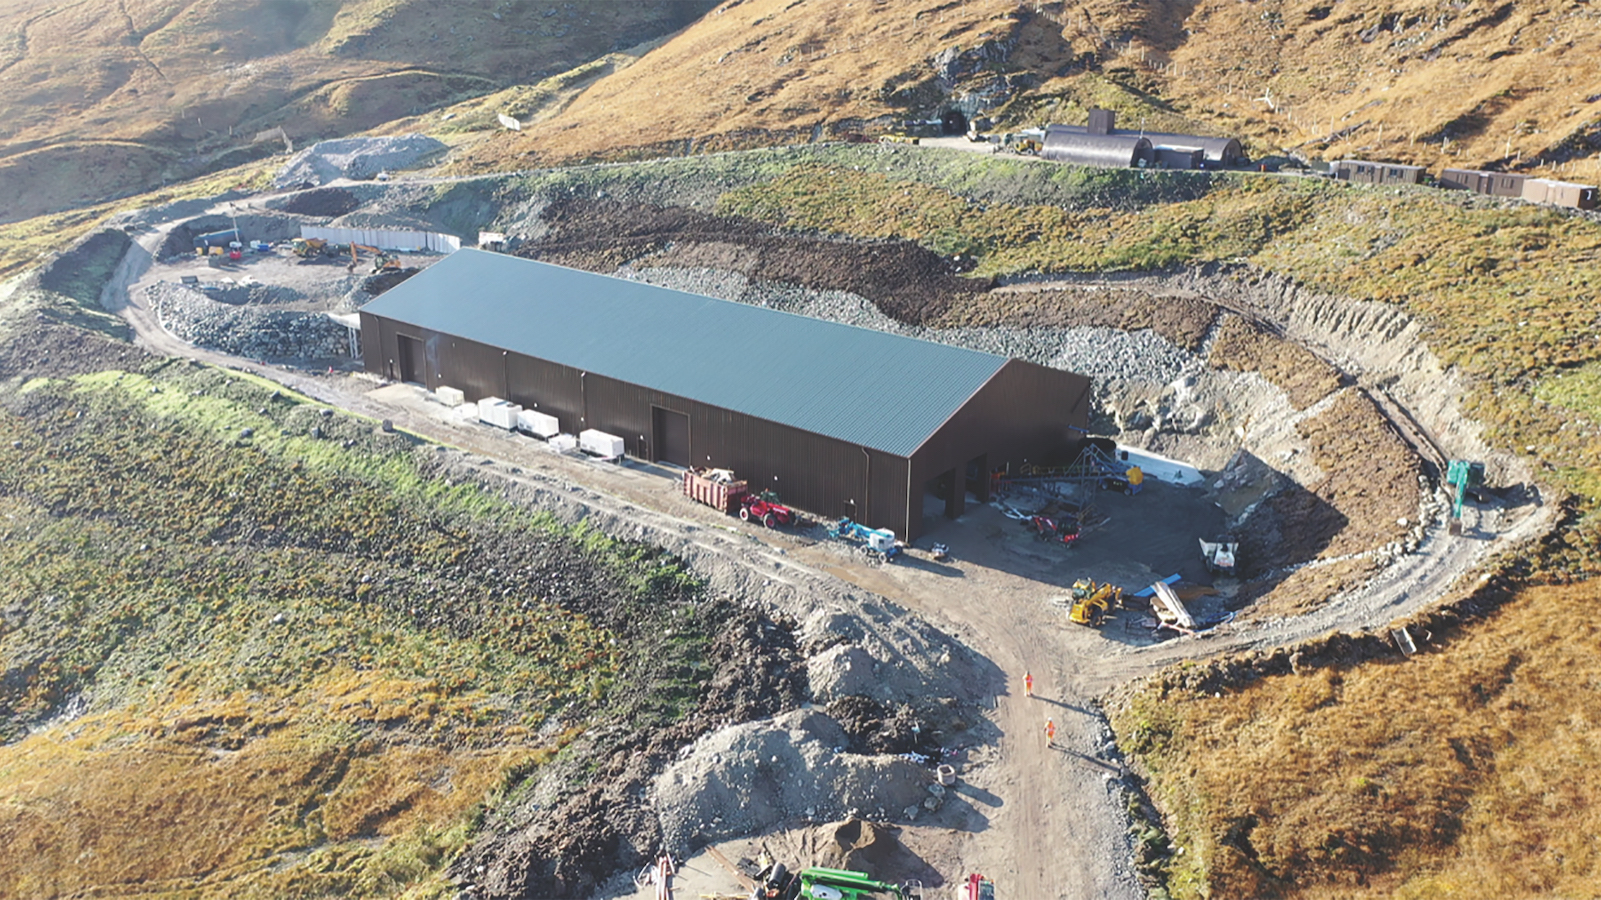 The processing building is cut into the mountainside